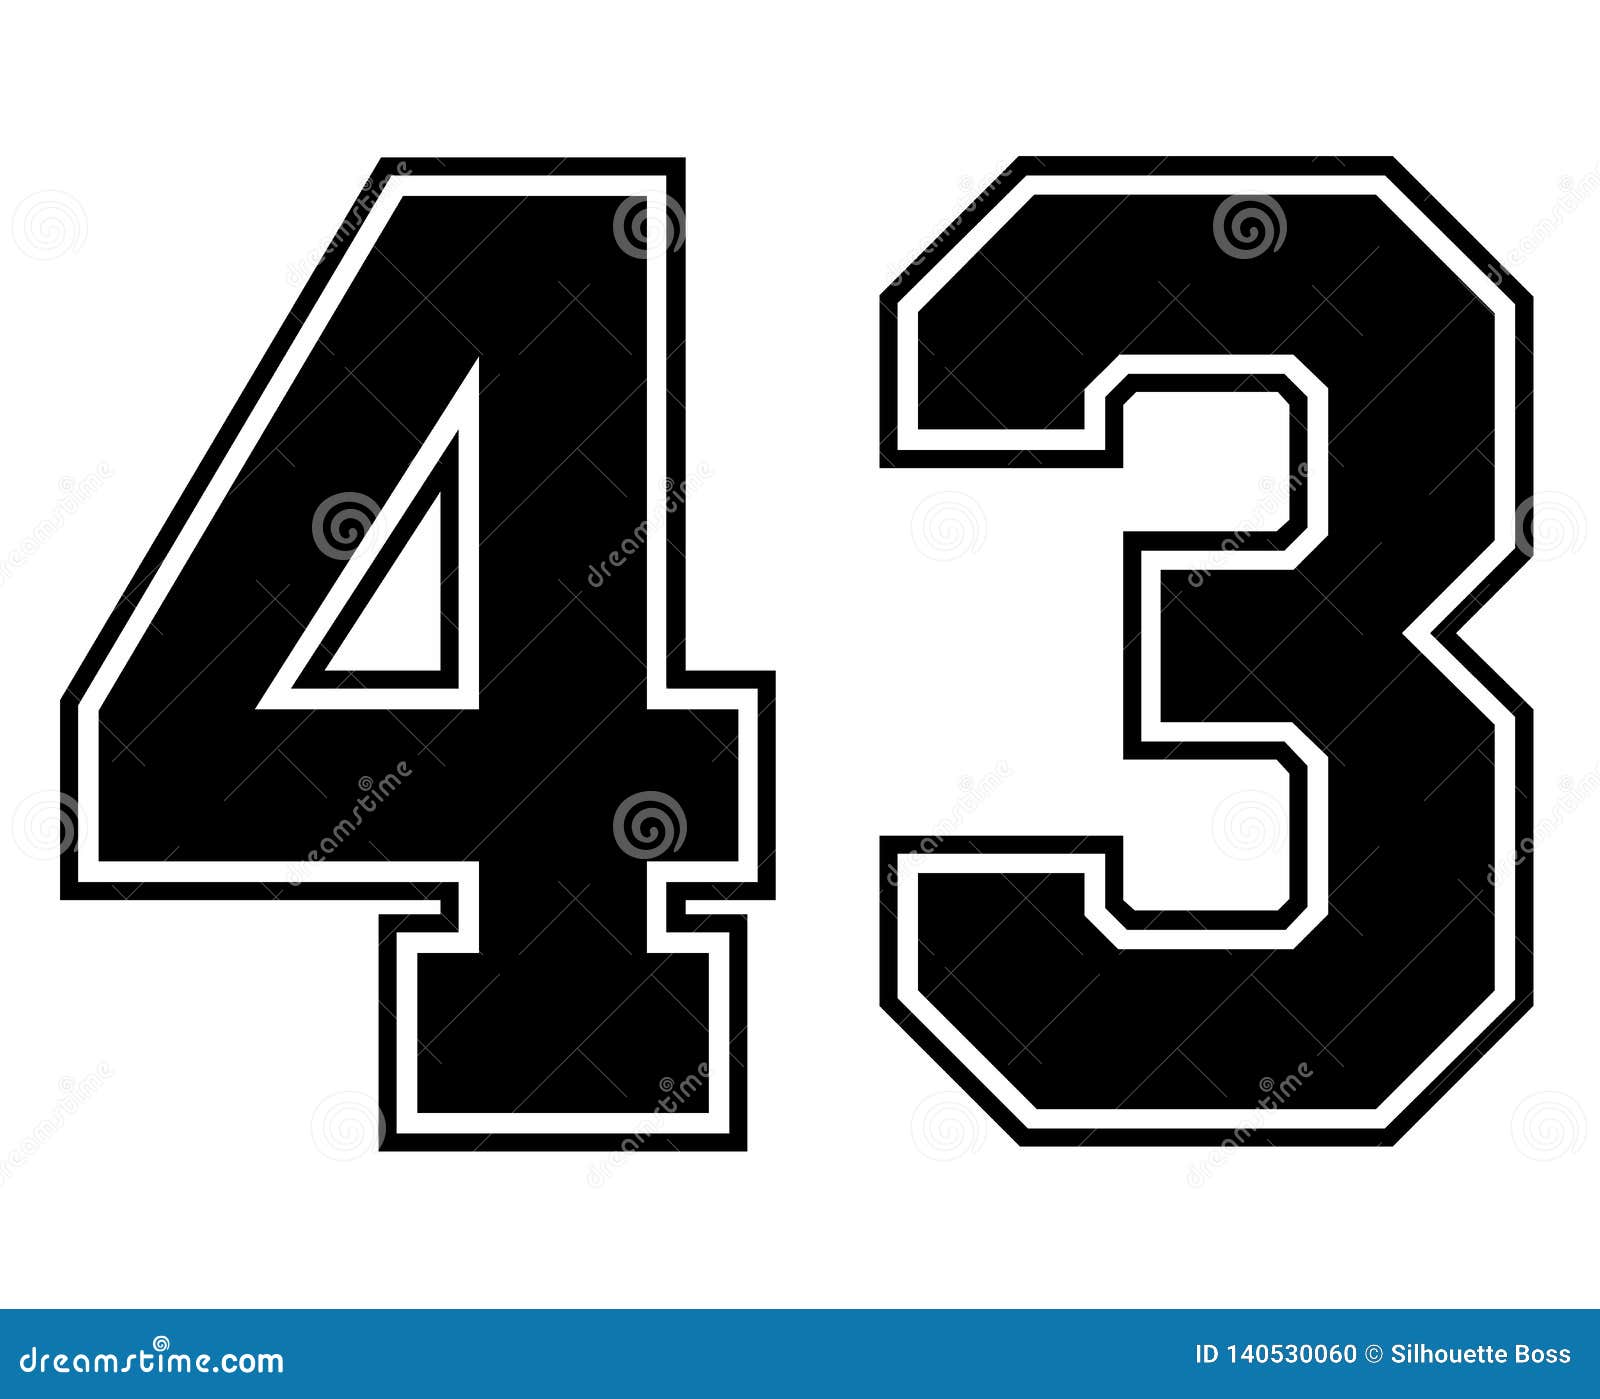 43 jersey number | www.euromaxcapital.com